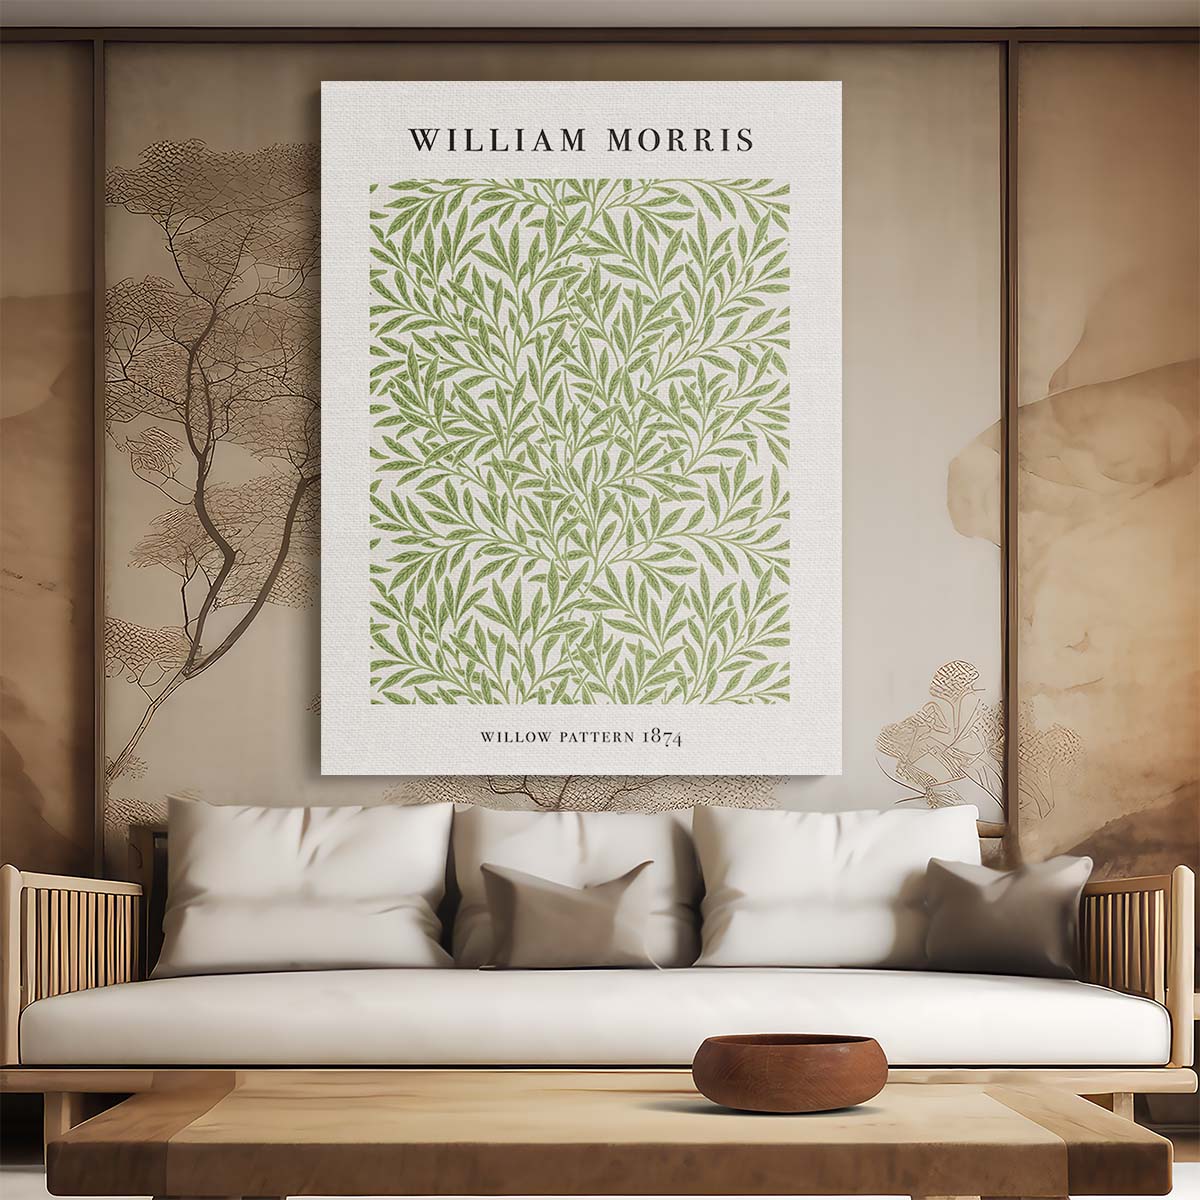 Vintage William Morris Willow Pattern Floral Illustration Poster by Luxuriance Designs, made in USA